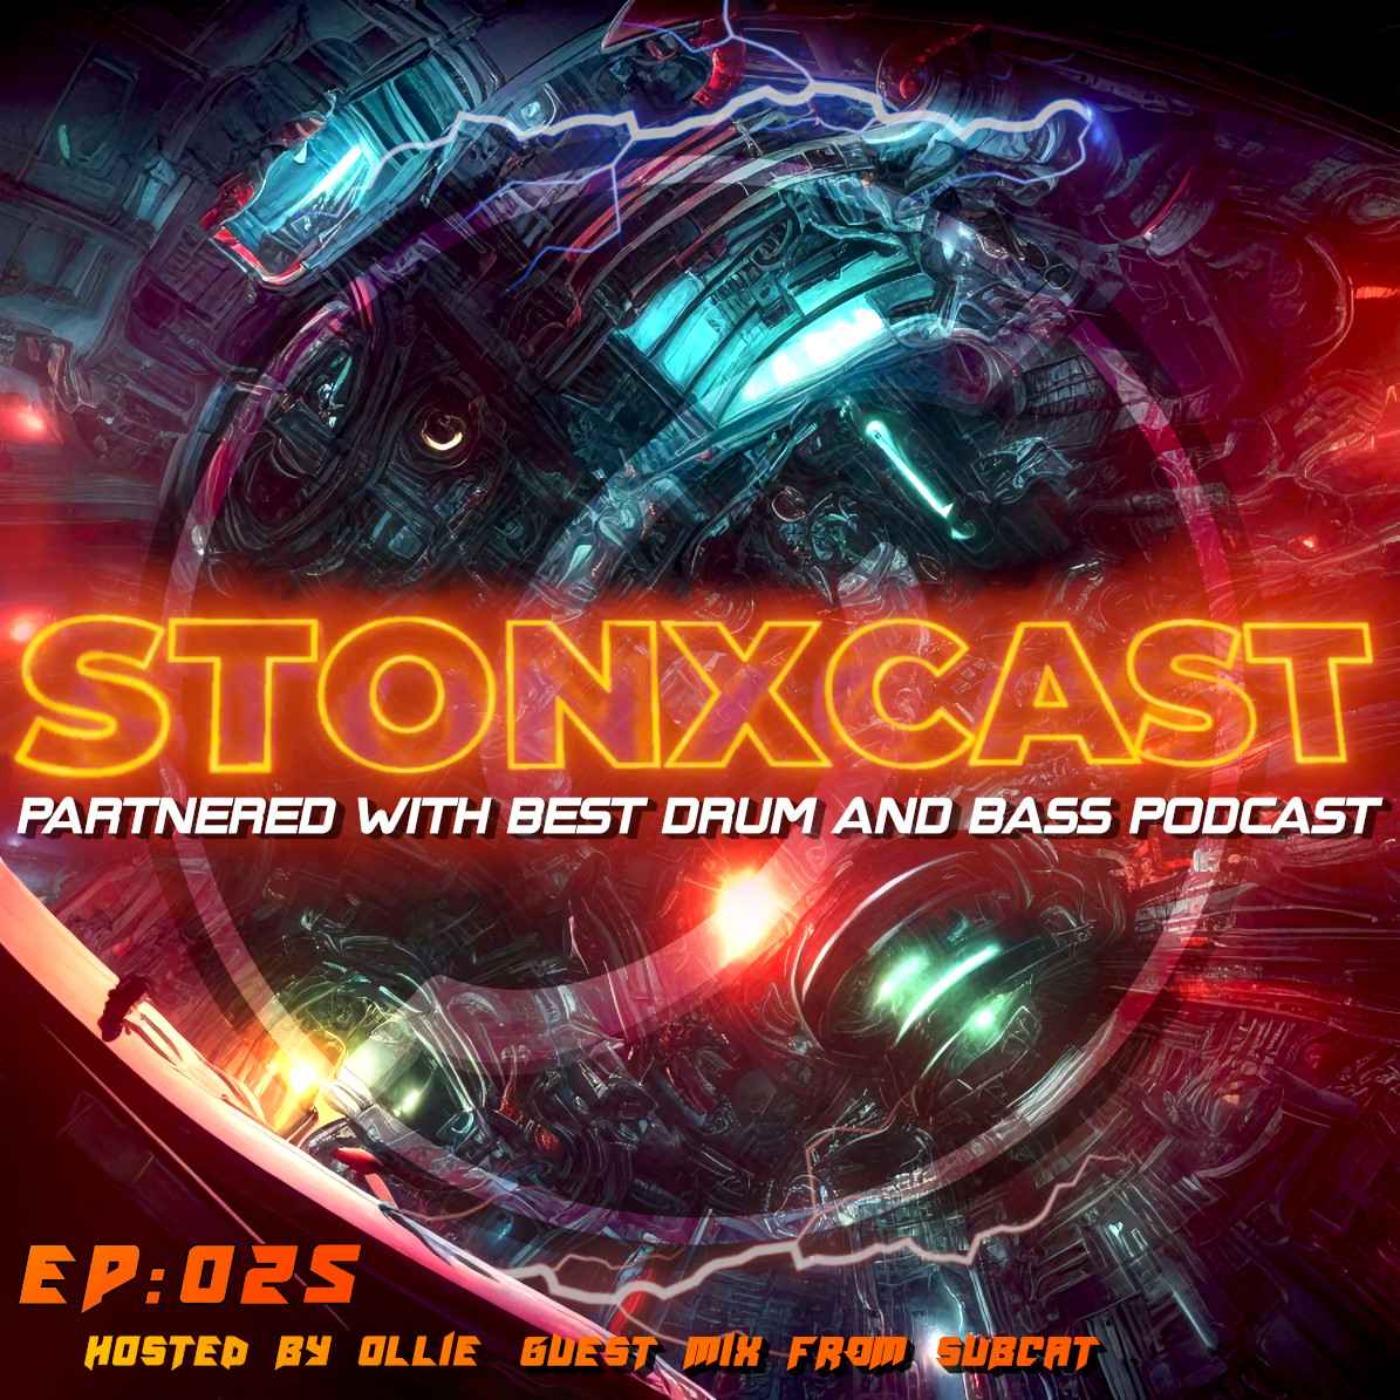 Stonxcast EP:025 - Hosted by Ollie Guest Mix from Subcat Artwork